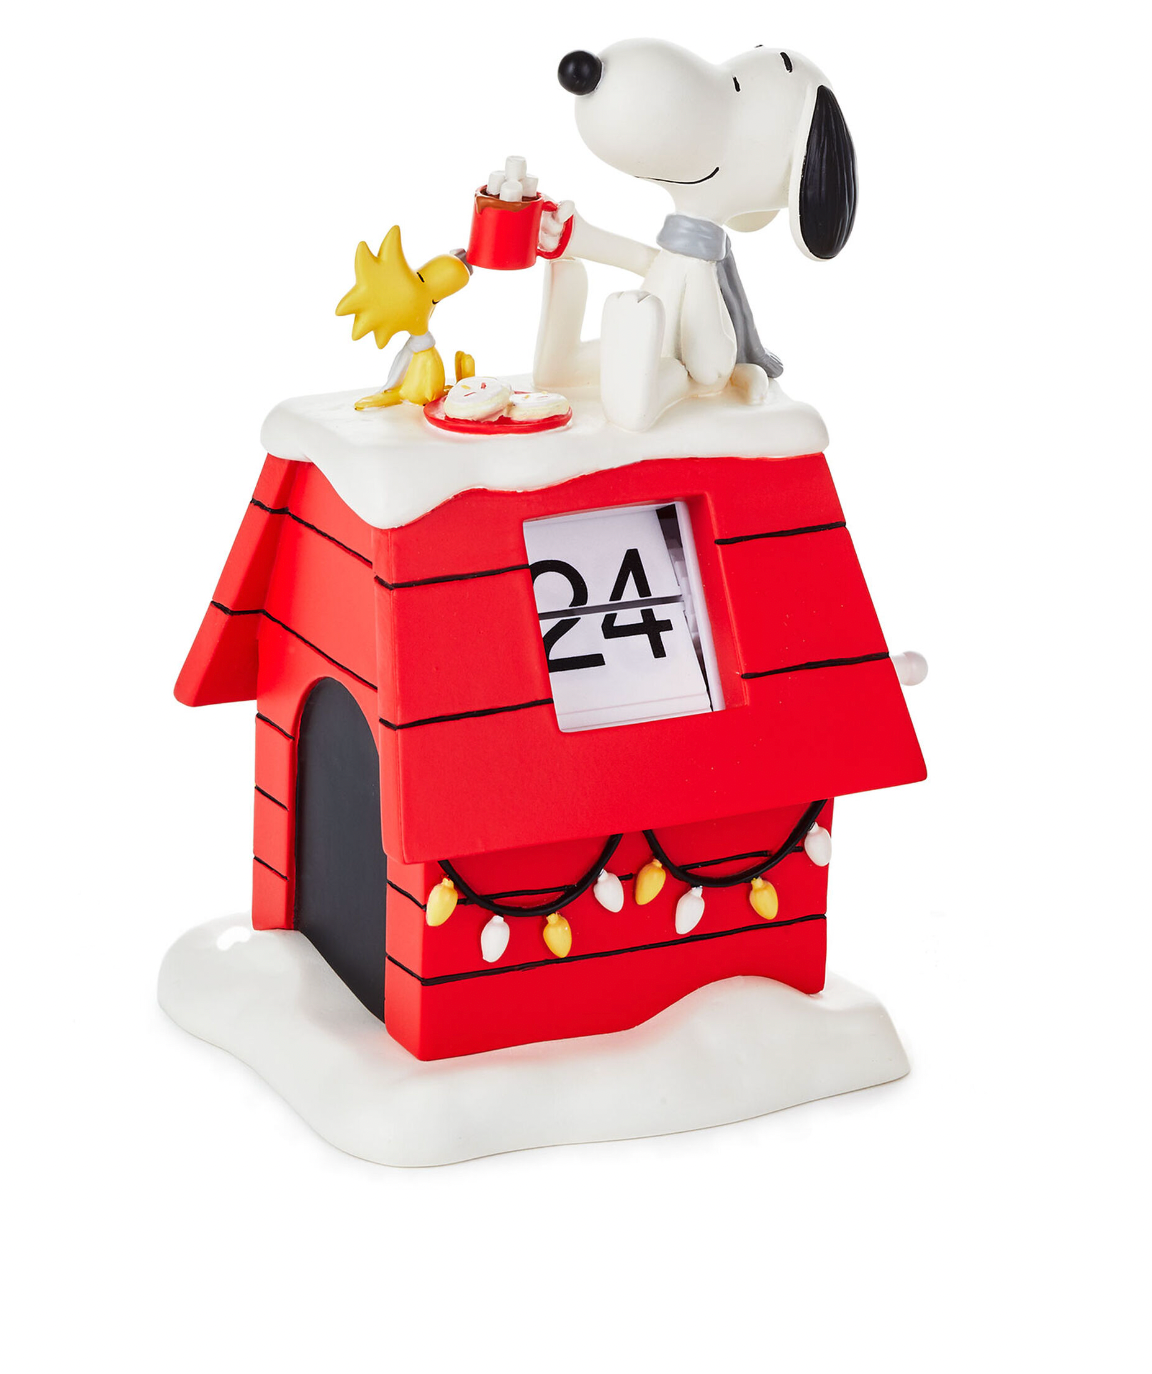 Peanuts Snoopy and Woodstock on Doghouse Christmas Countdown Calendar Figurine